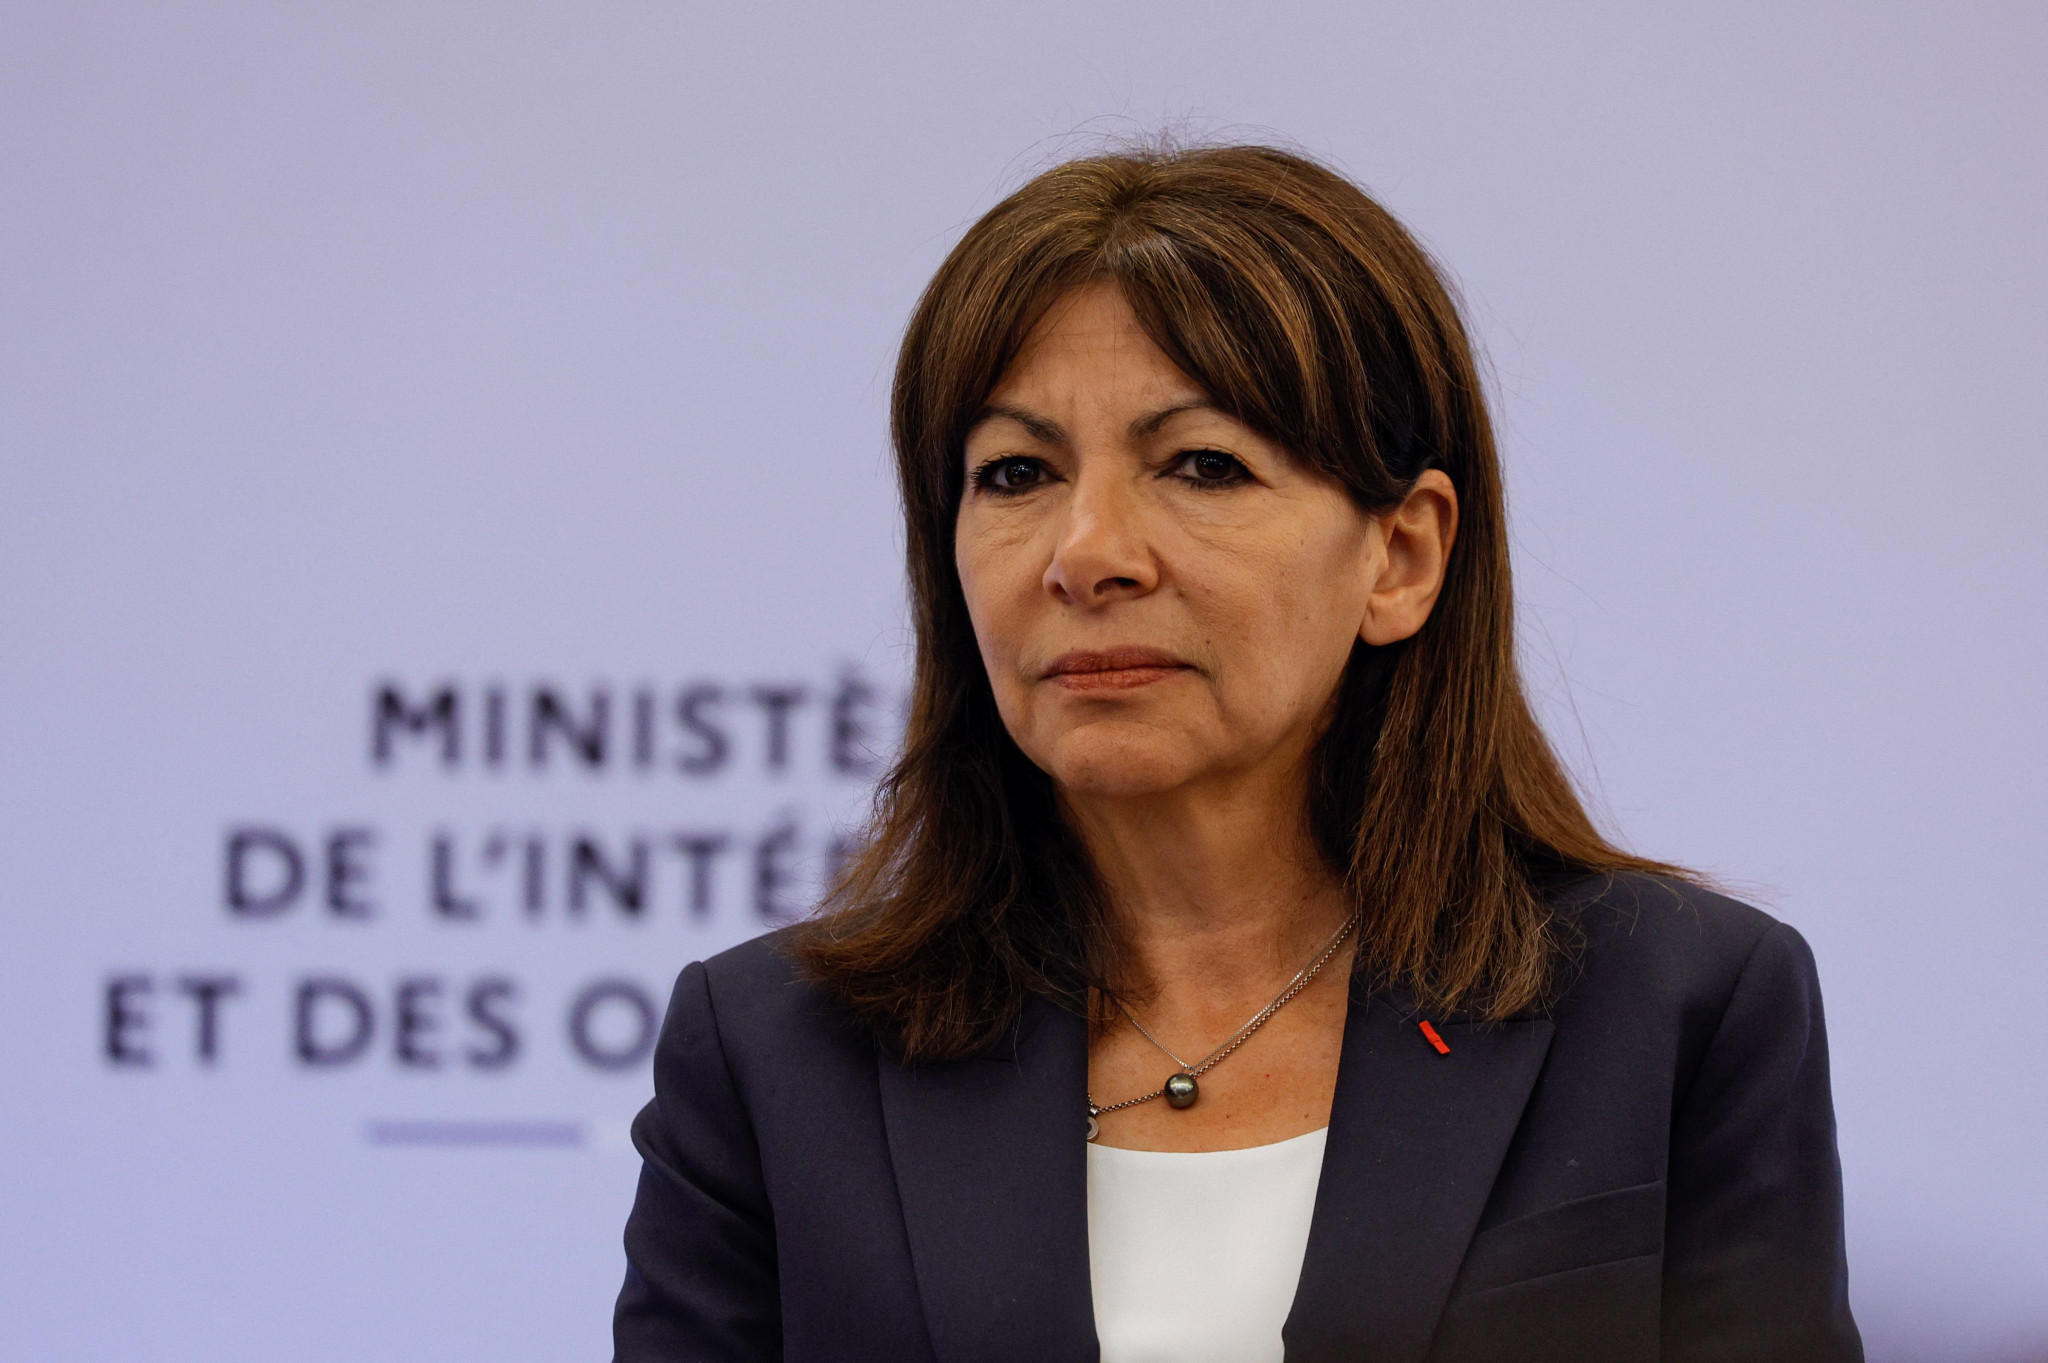 Paris Mayor Anne Hidalgo has strongly defended the Paris 2024 budget plans following criticisms over findings of a recent Government evaluation report ©Getty Images